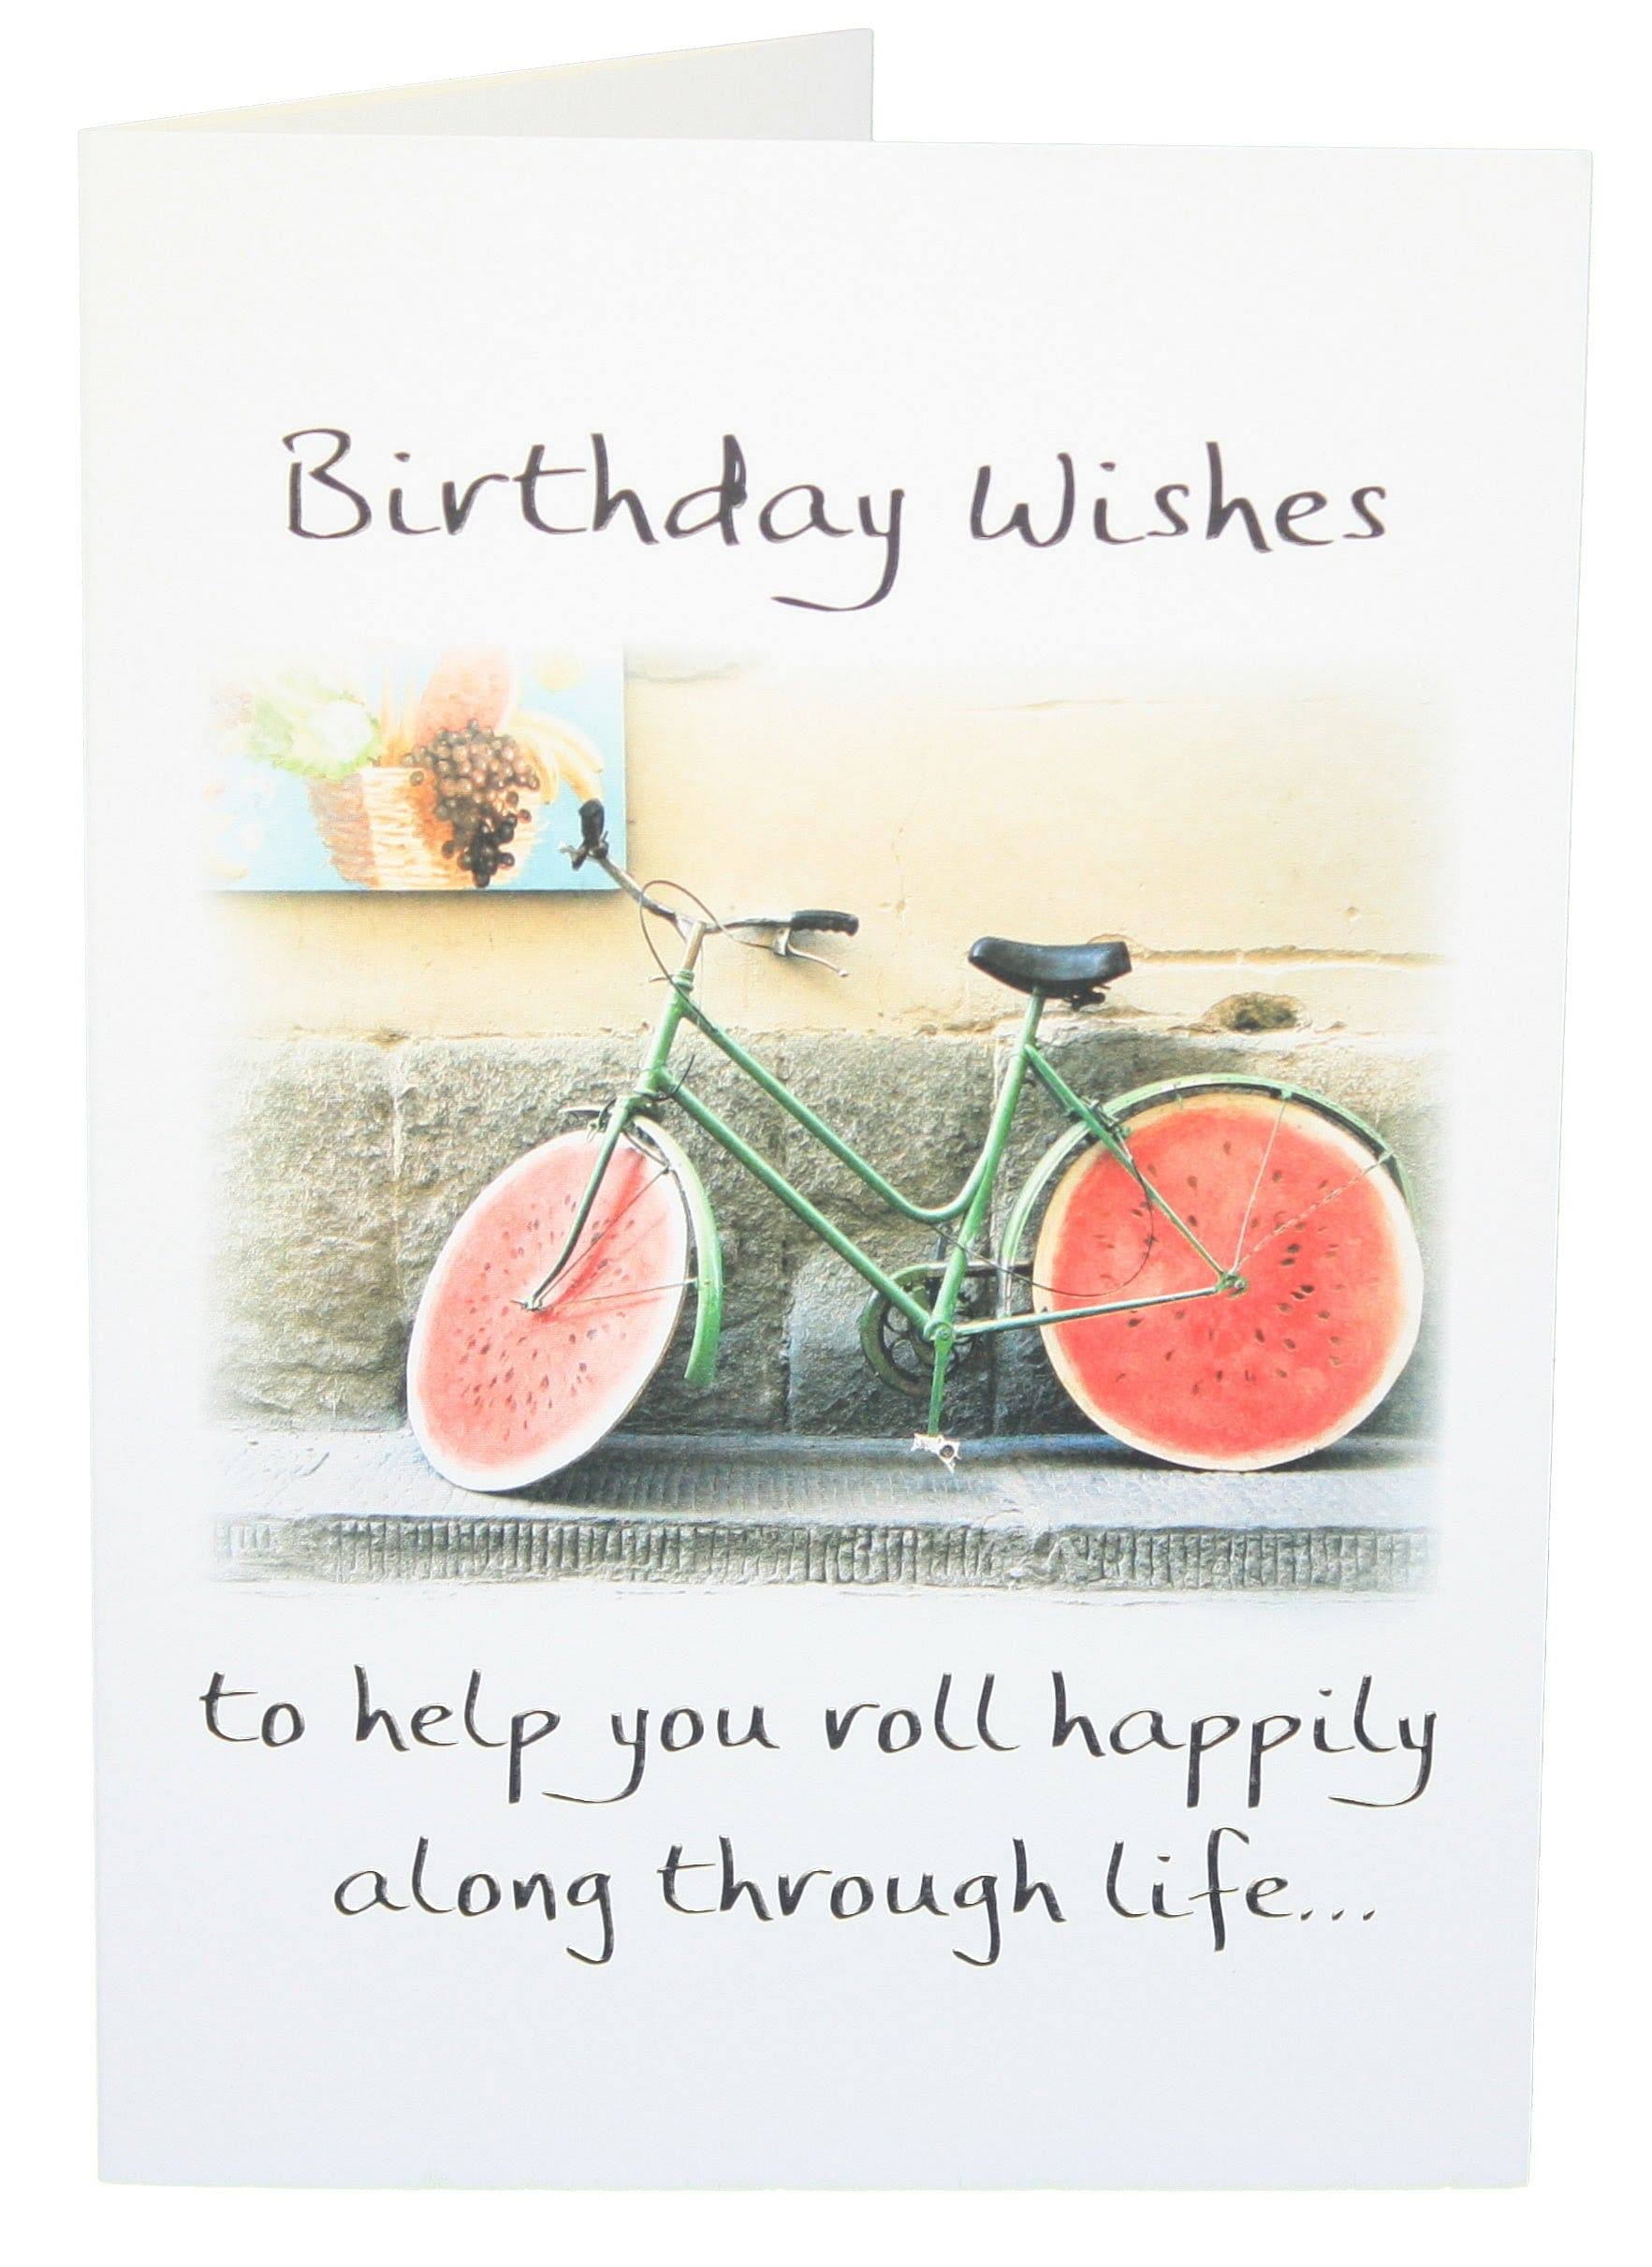 Birthday Wishes to Help You Roll Happily Along Through Life